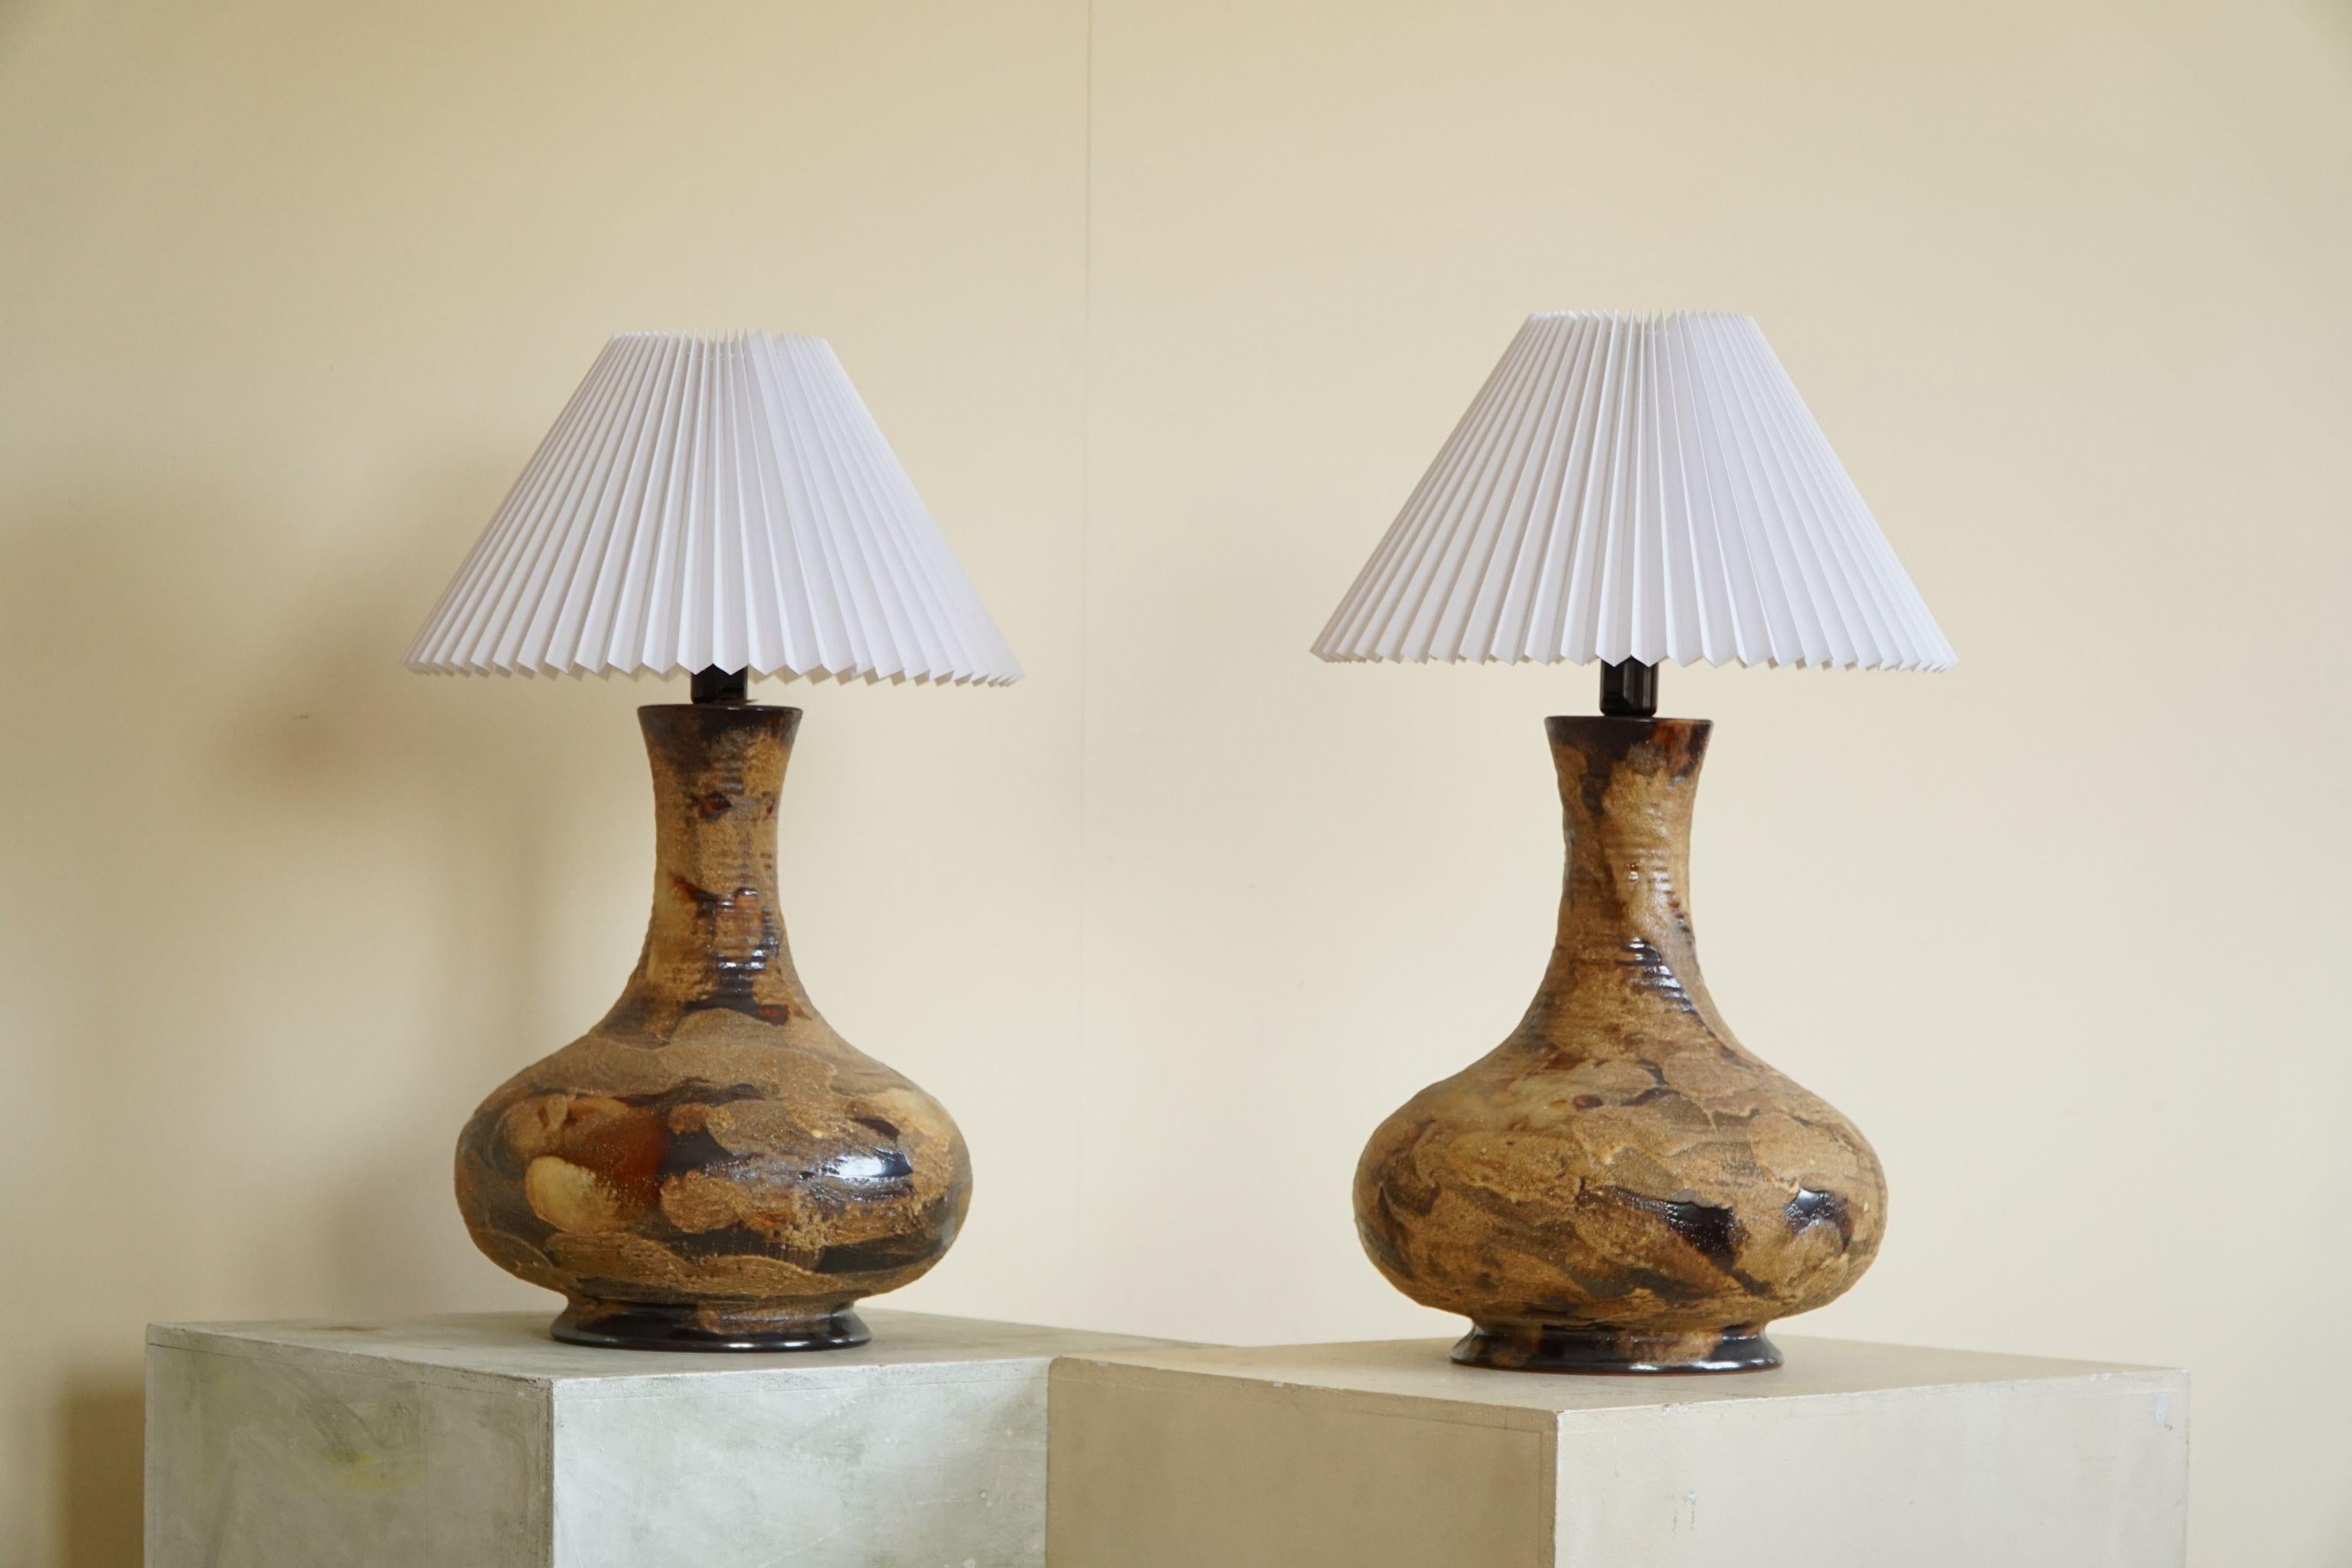 Danish Modern Pair of Large Ceramic Table Lamps, Mid Century, Made in 1970s For Sale 2